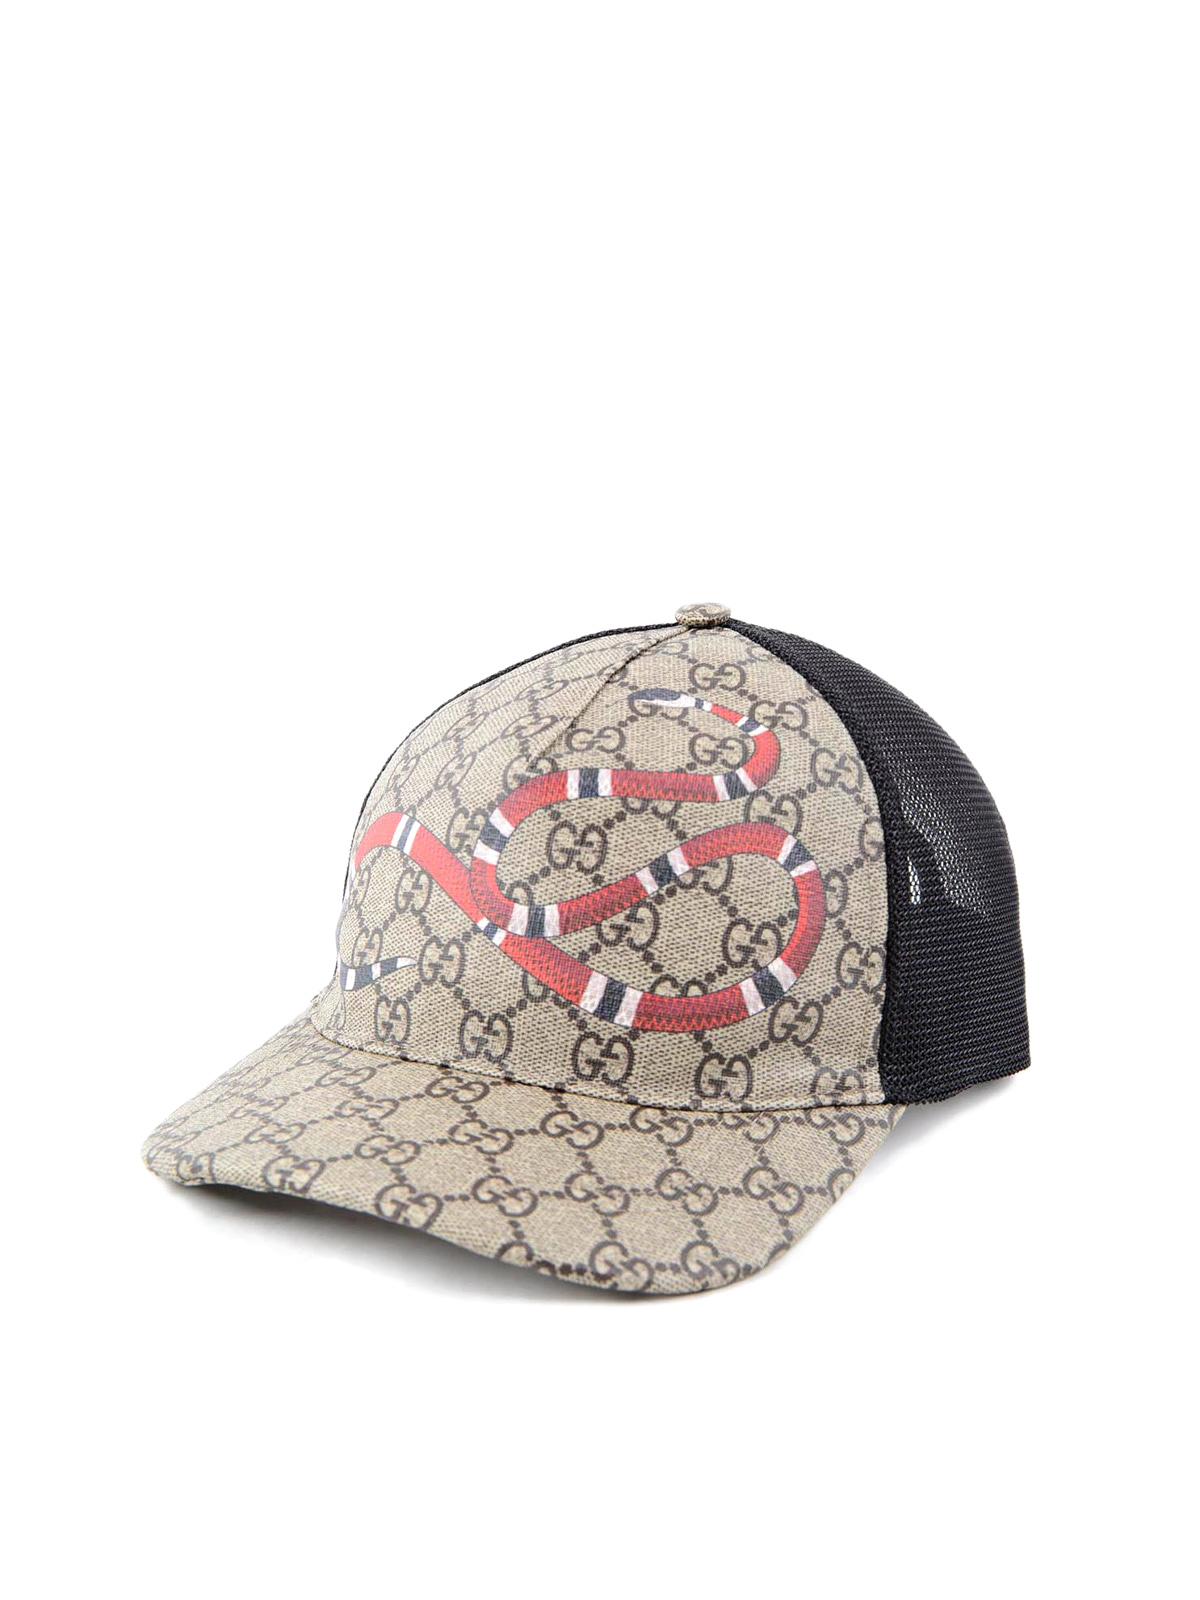 gucci cap with snake